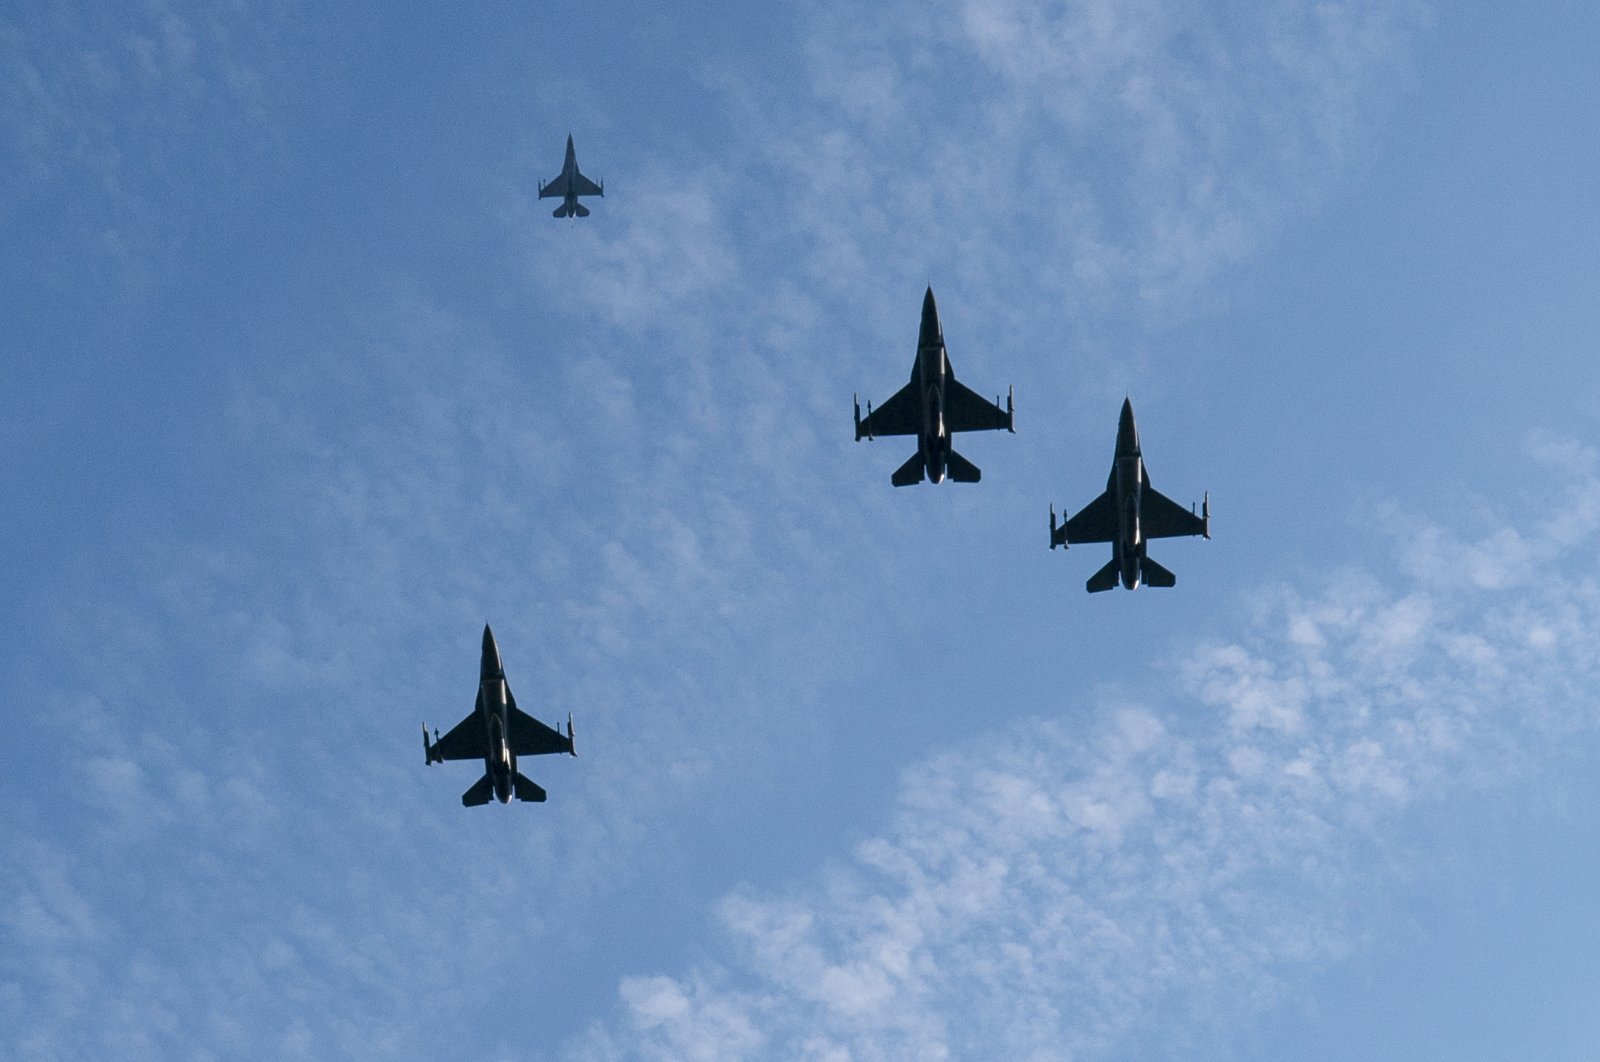 A formation of U.S. Air Force F-16 Fighting Falcons flies over during Arlington National Cemetery, Virginia, U.S., Nov. 11, 2021. (AP Photo)